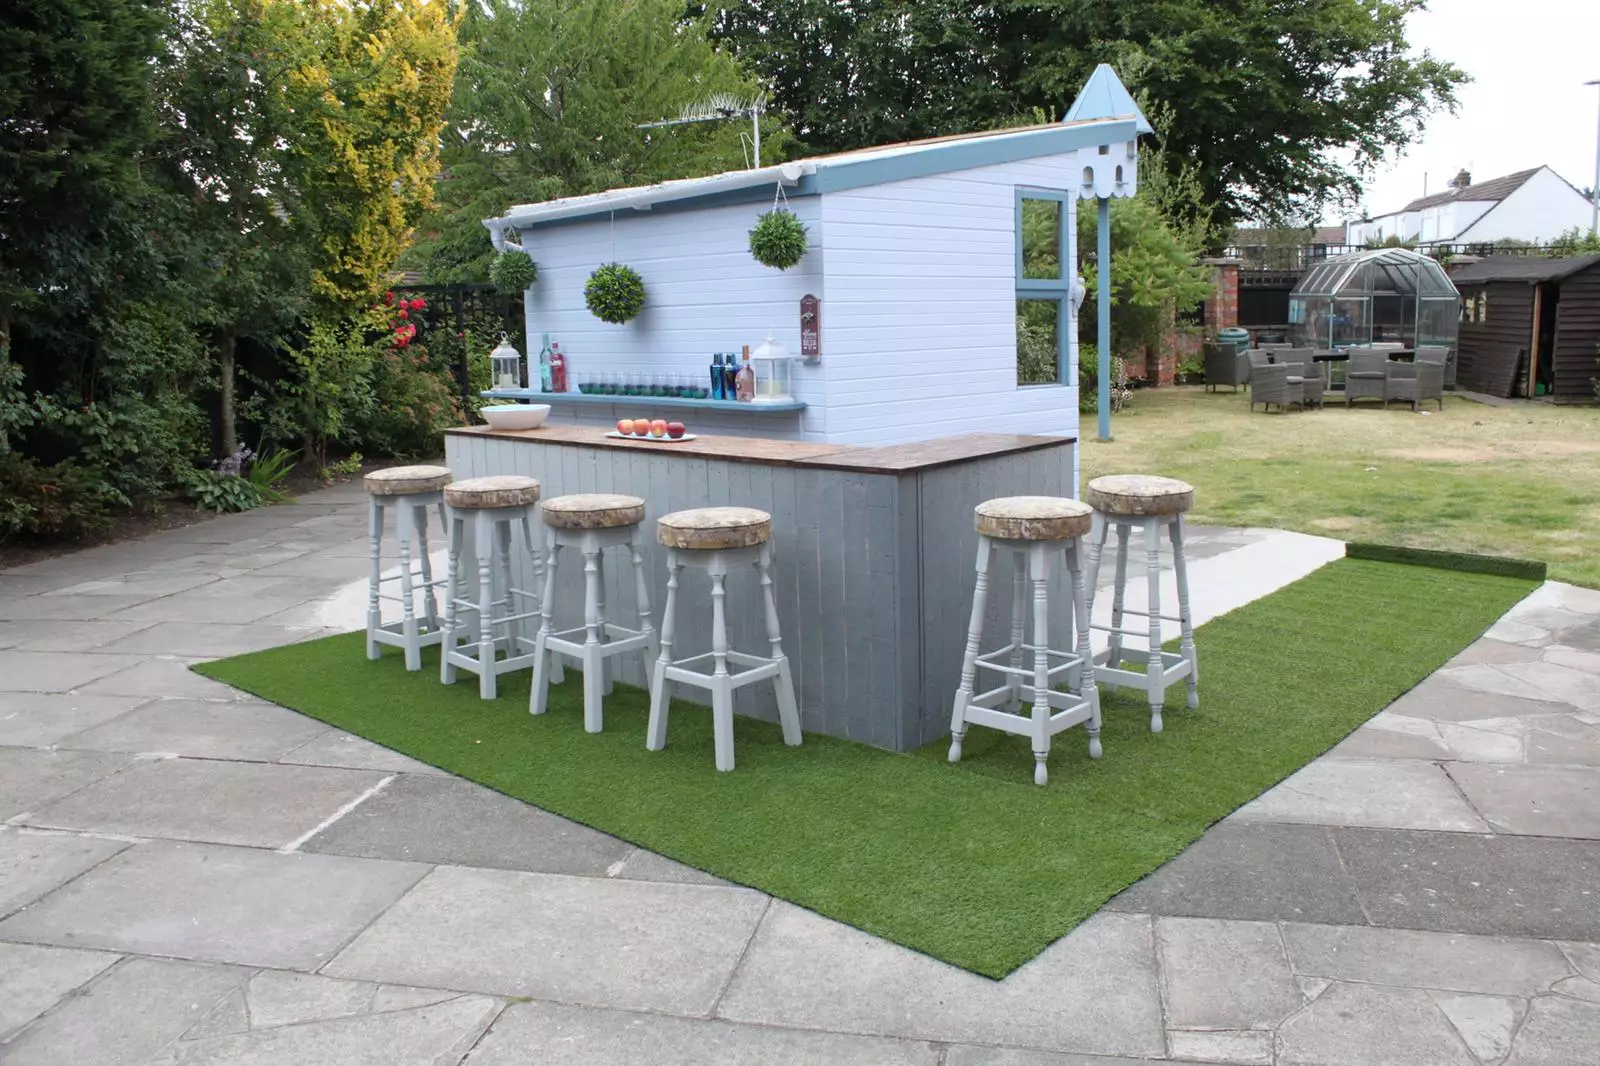 We chatted to Craig Phillips who has also created his own outdoor bar (